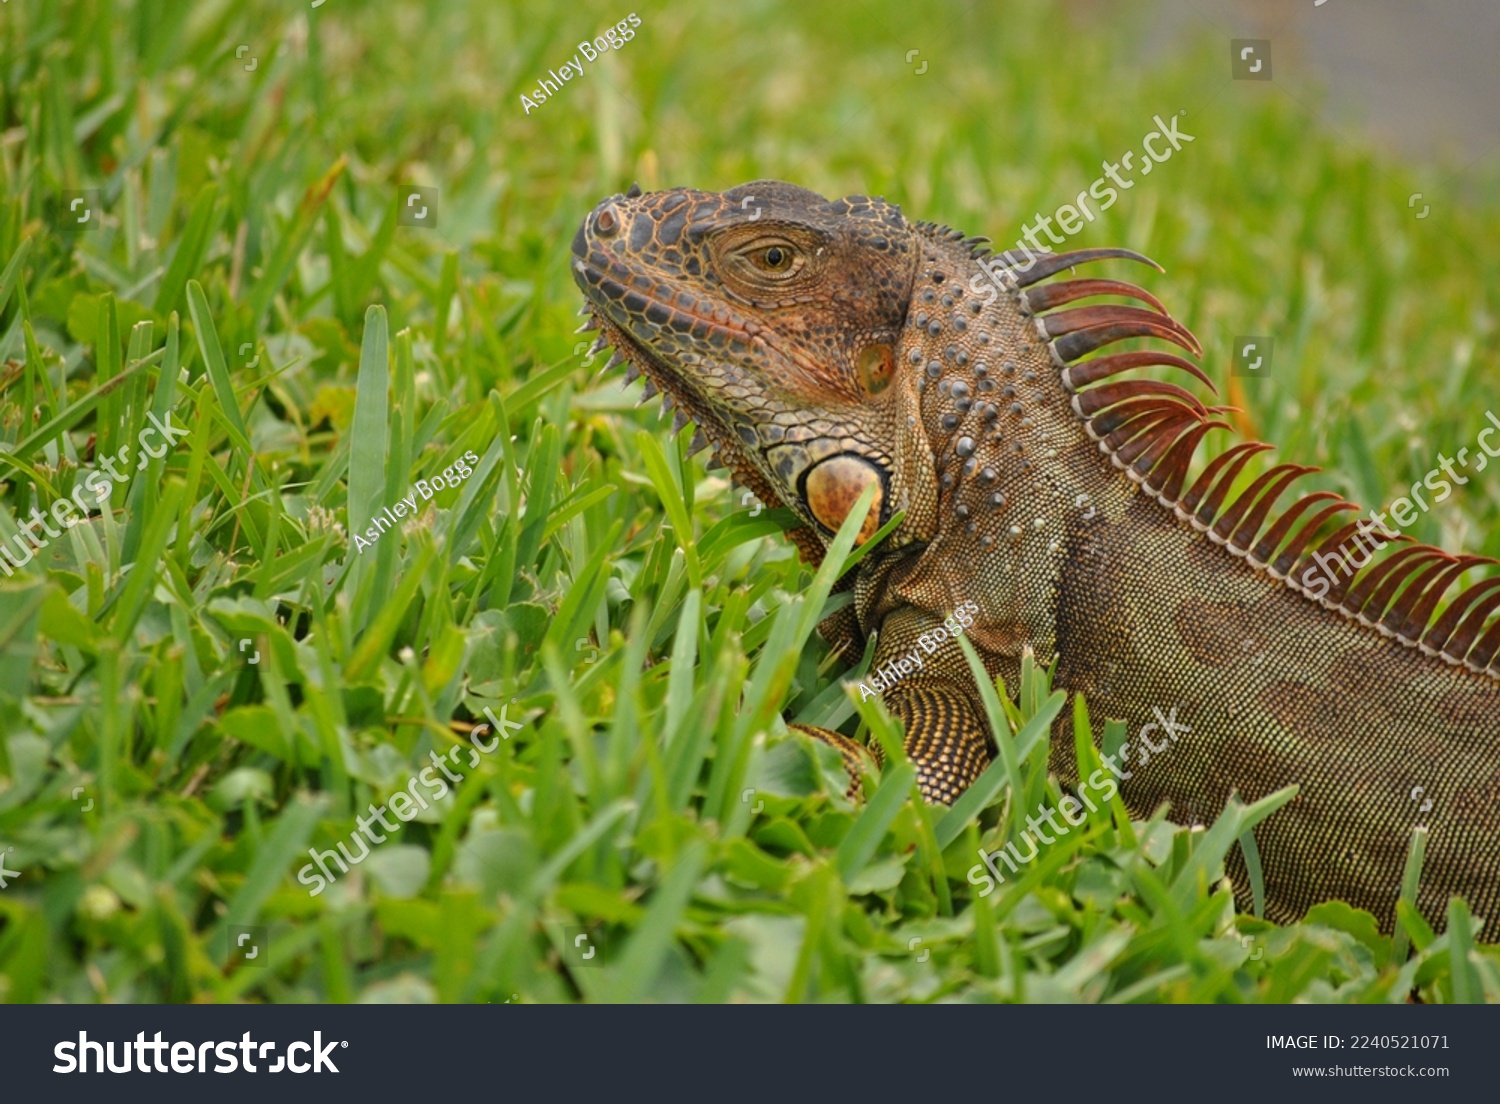 Close up on a wild iguana in south Florida sitting in grass. #2240521071